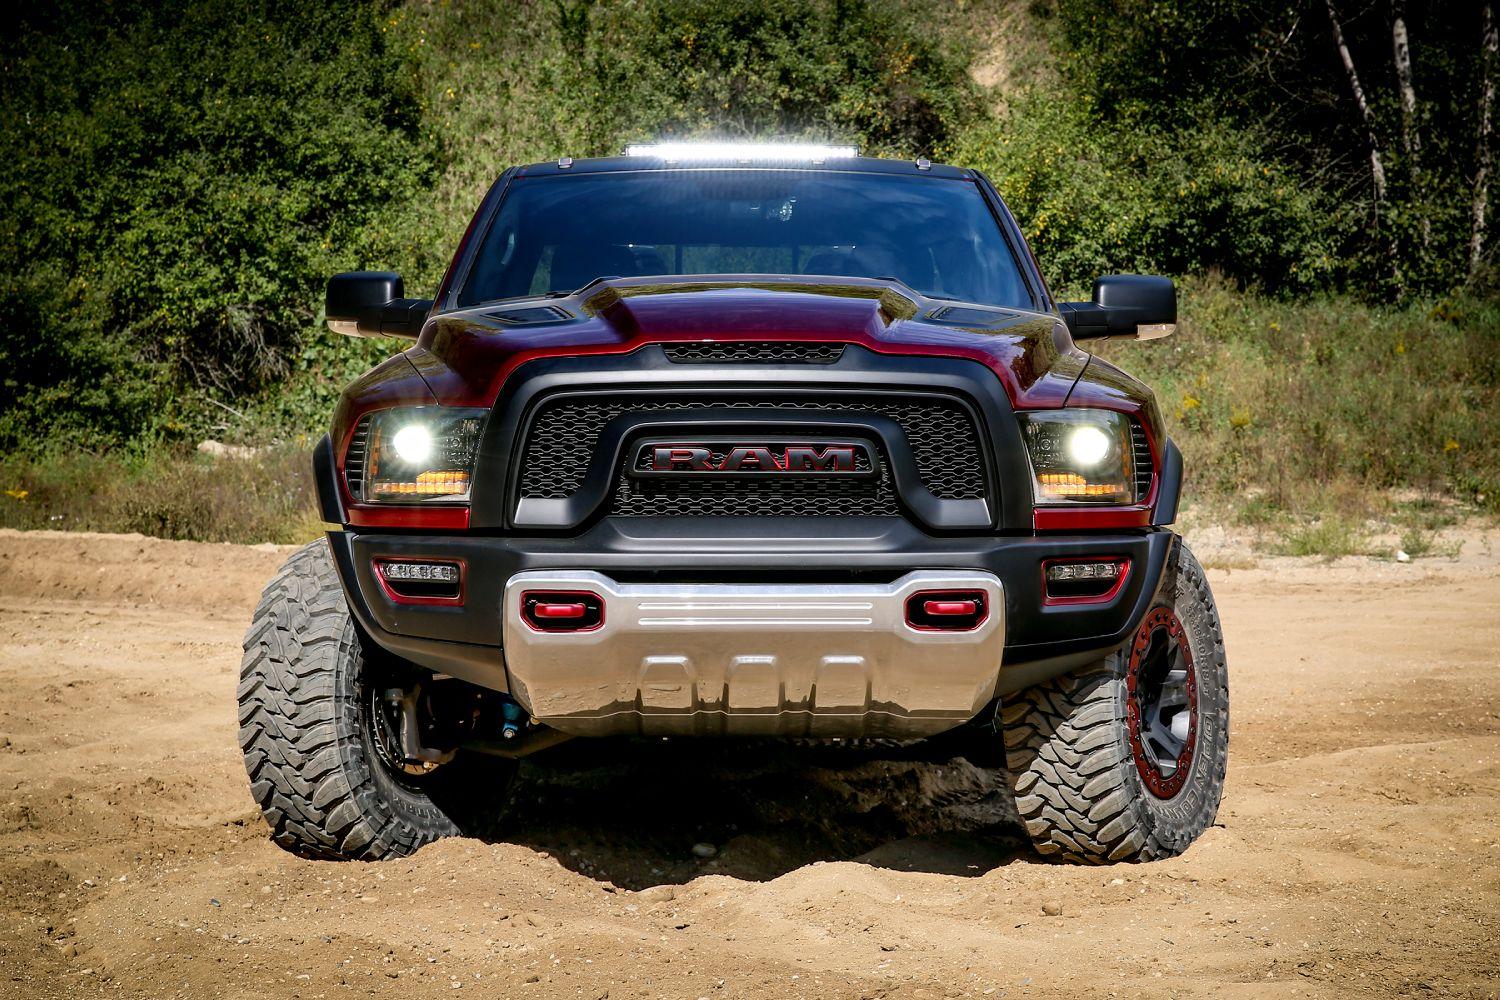 There have always been rumors of a Ram Rebel TRX, but it has yet to hit production lines.